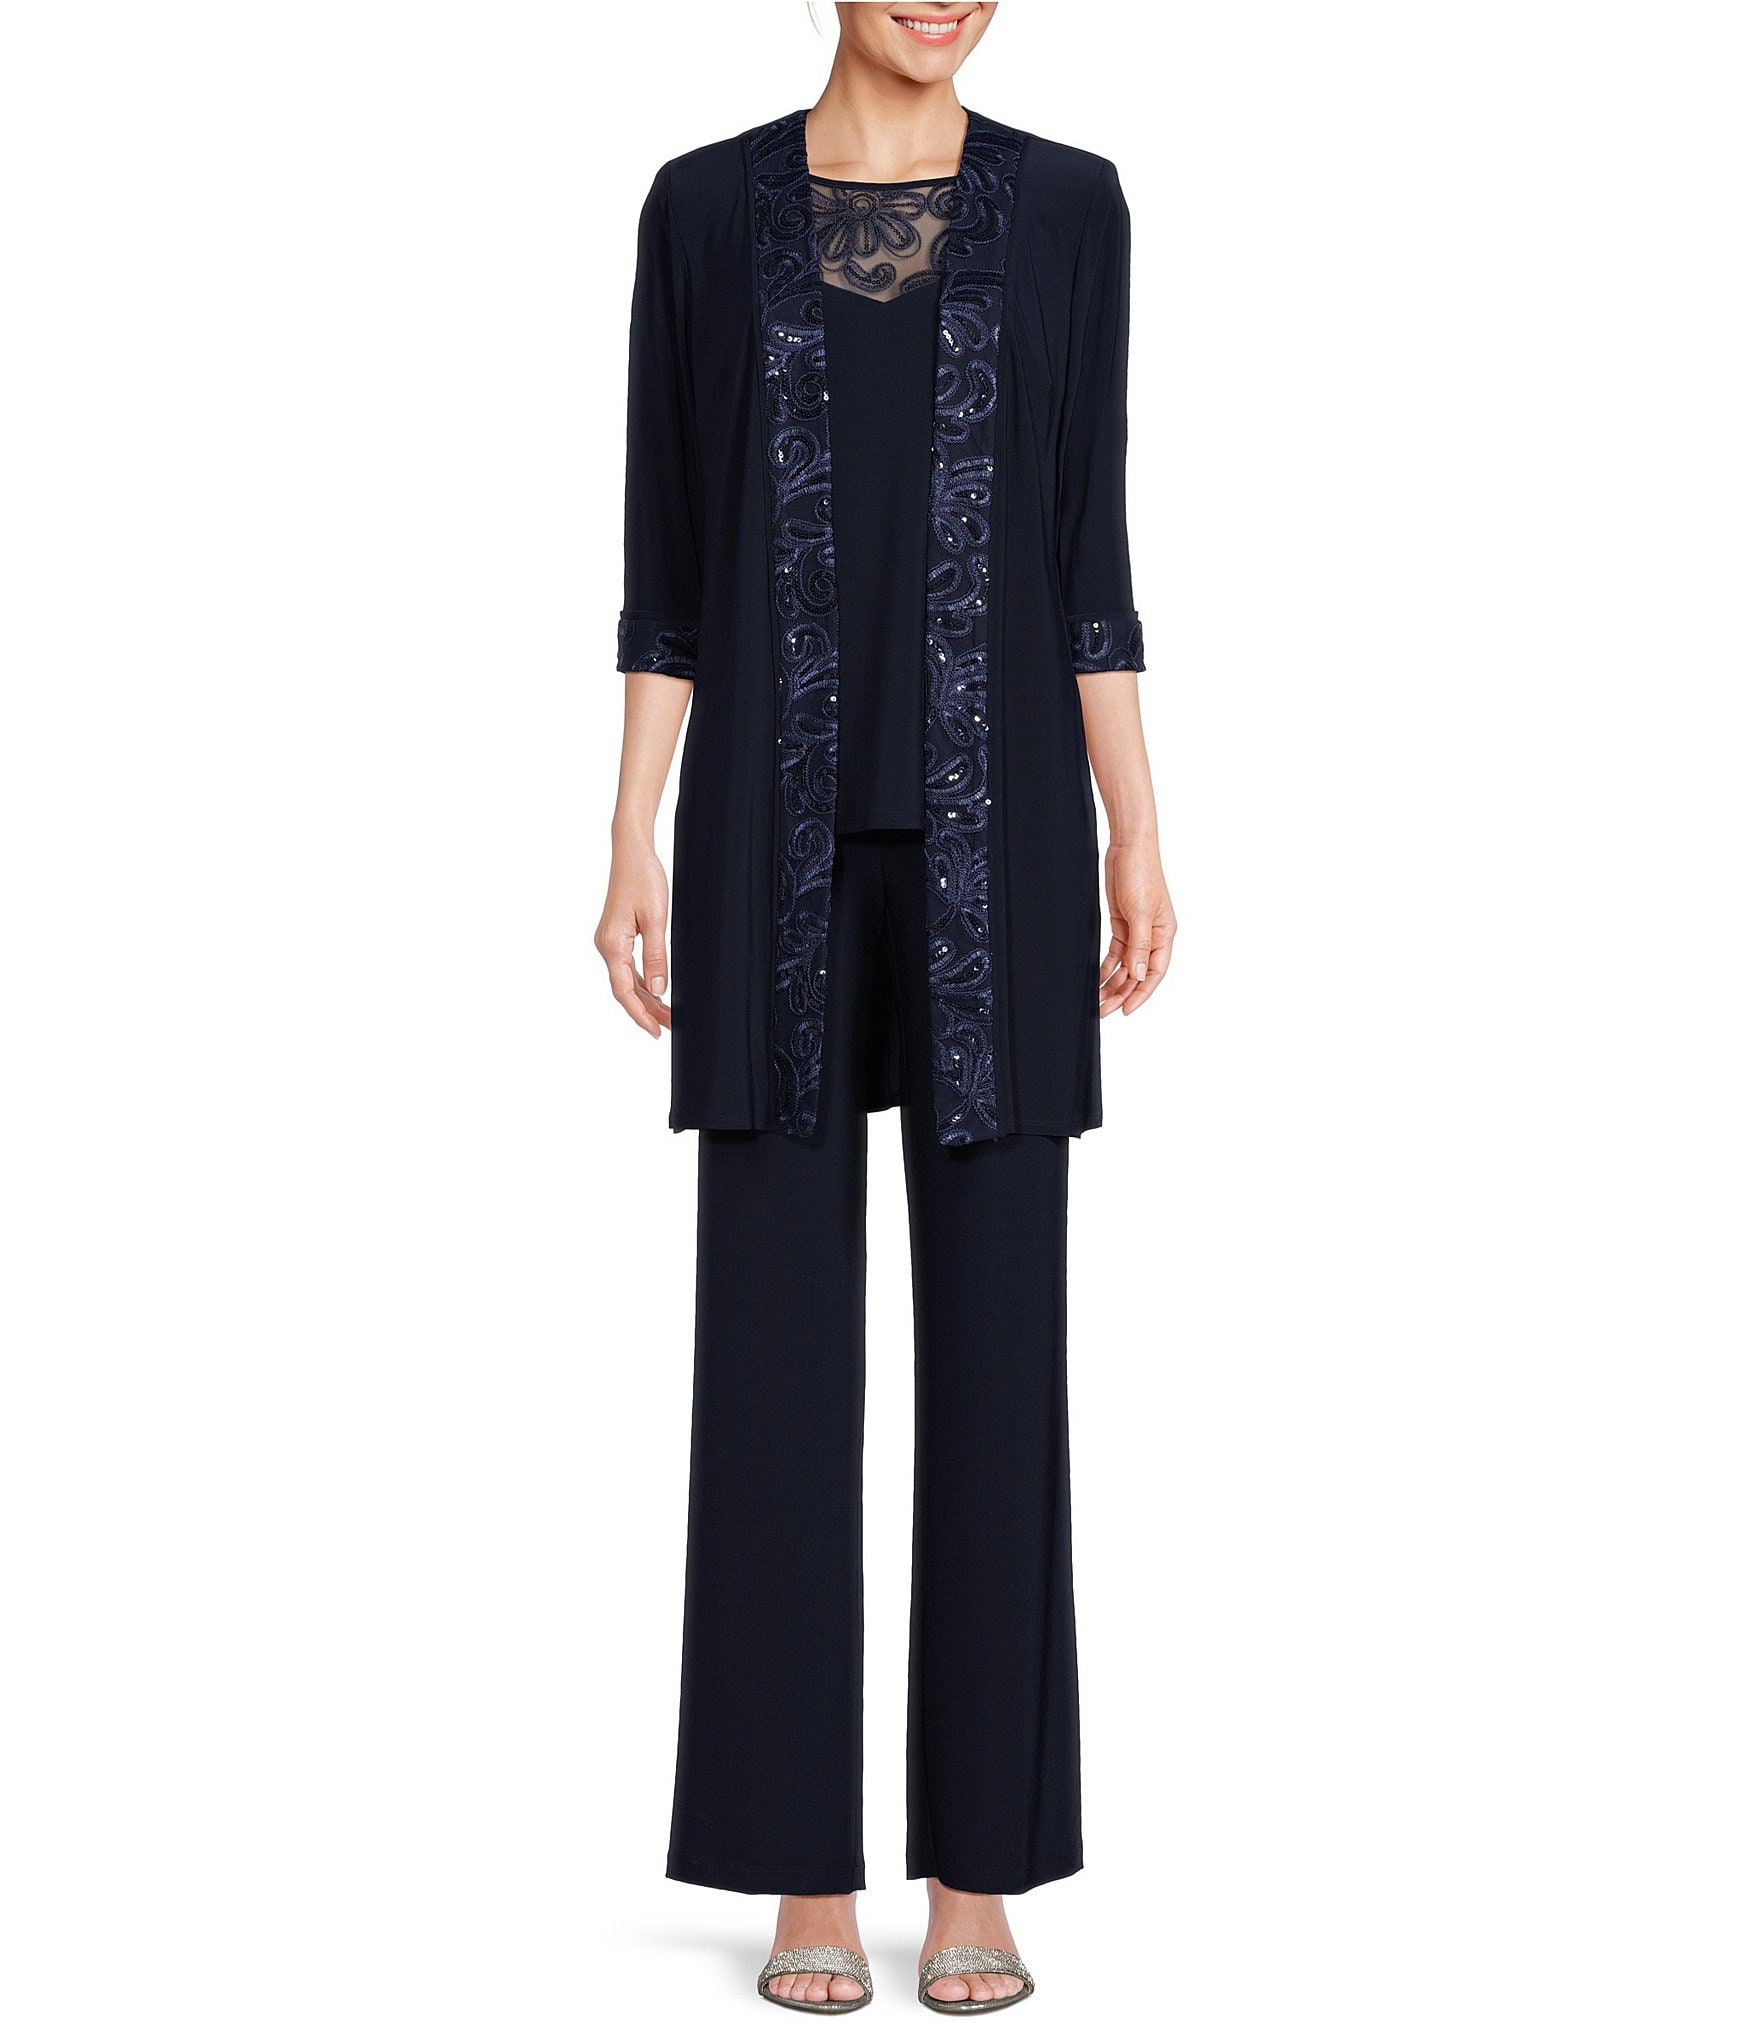 embroidery: Women's Dressy Pant Sets